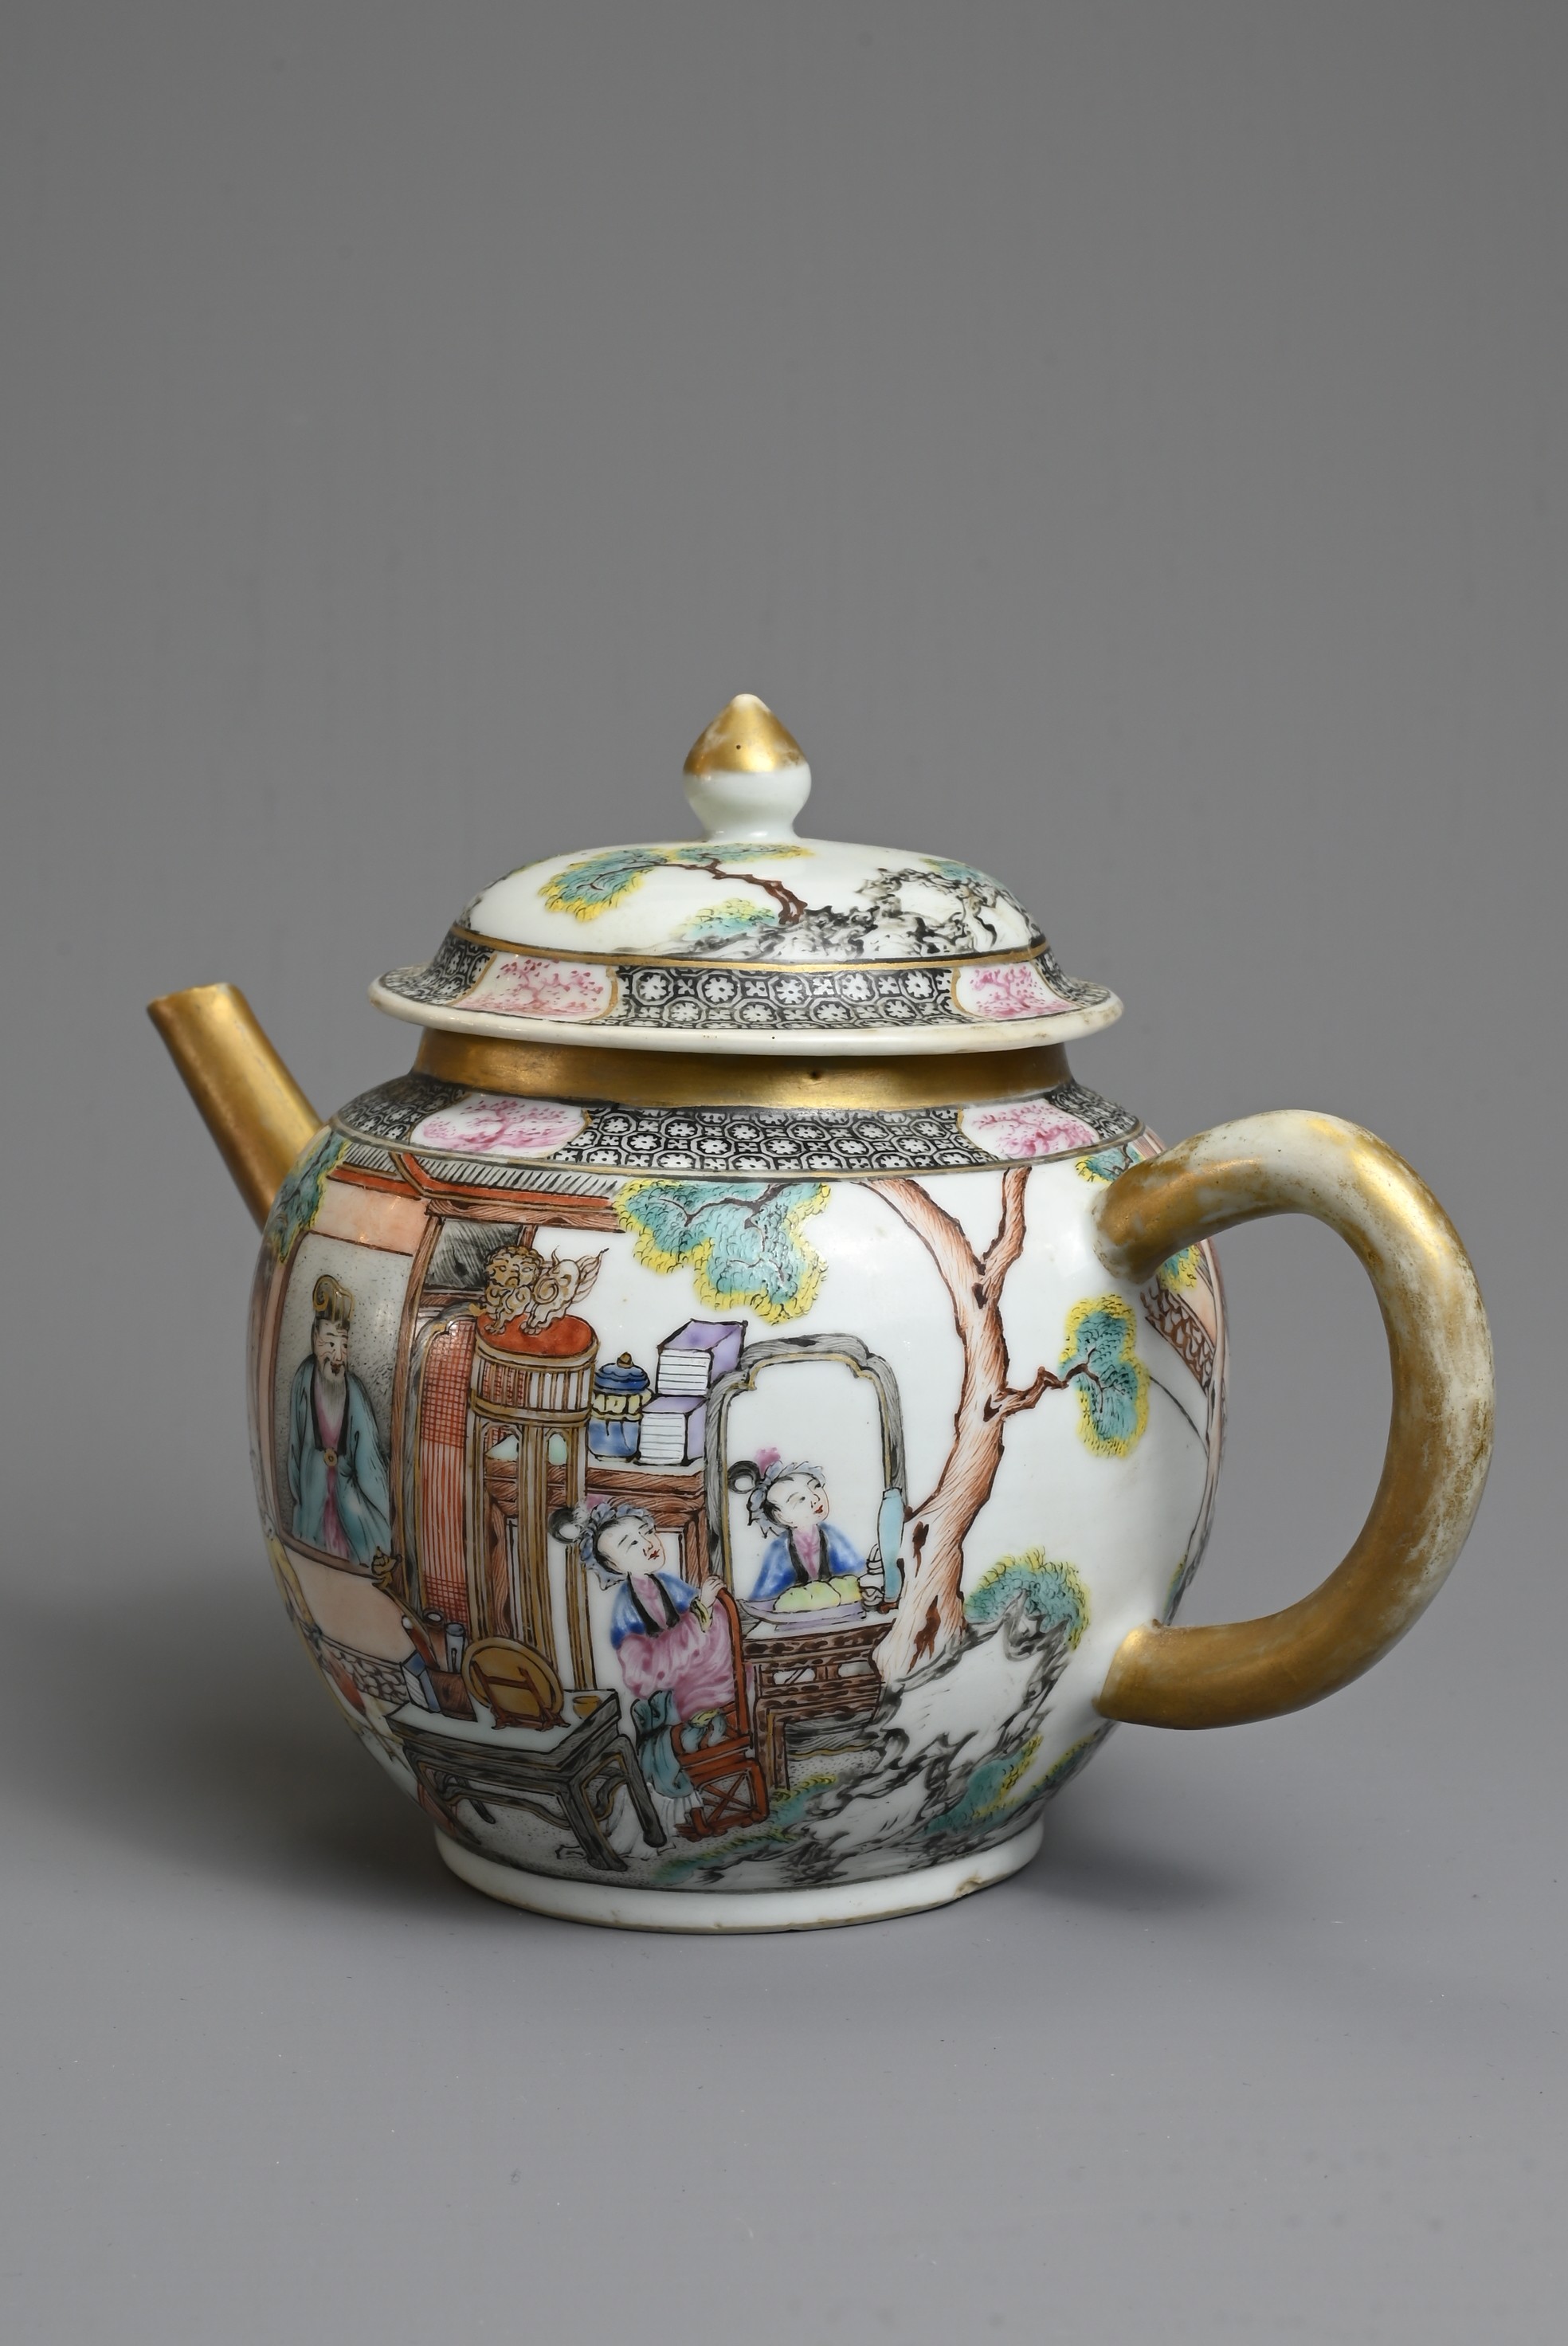 A FINE CHINESE FAMILLE ROSE PORCELAIN TEAPOT, 18TH CENTURY - Image 2 of 21